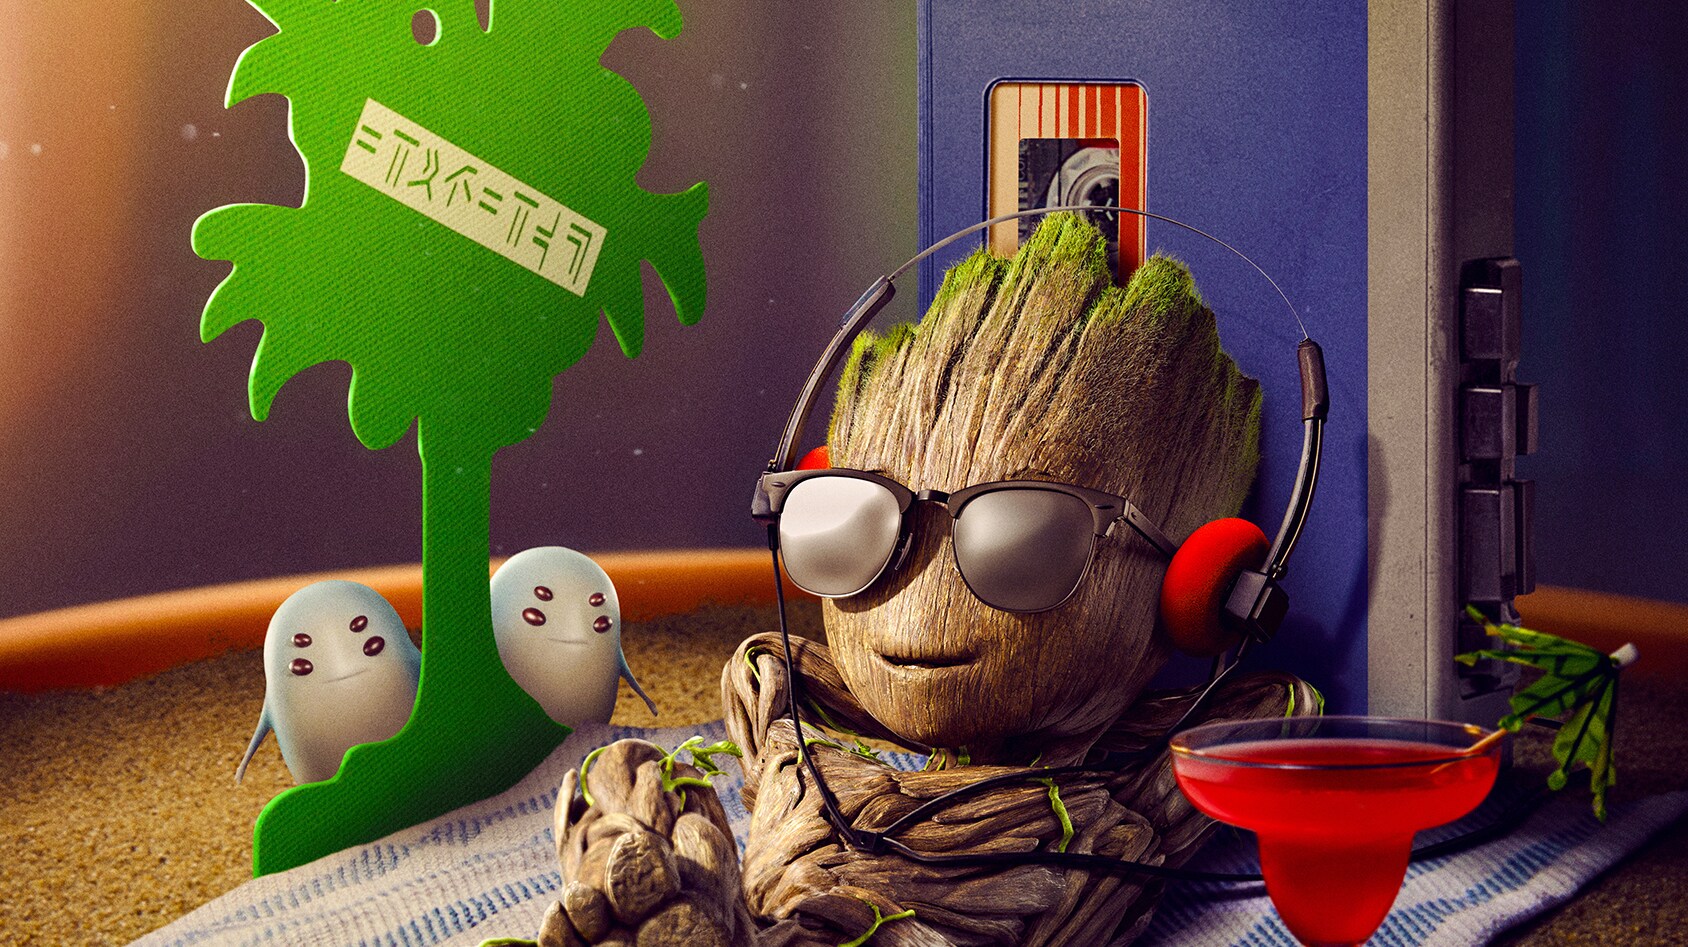 Disney+ Unveils Key Art And Launch Date For Marvel Studios’ “I Am Groot” Shorts